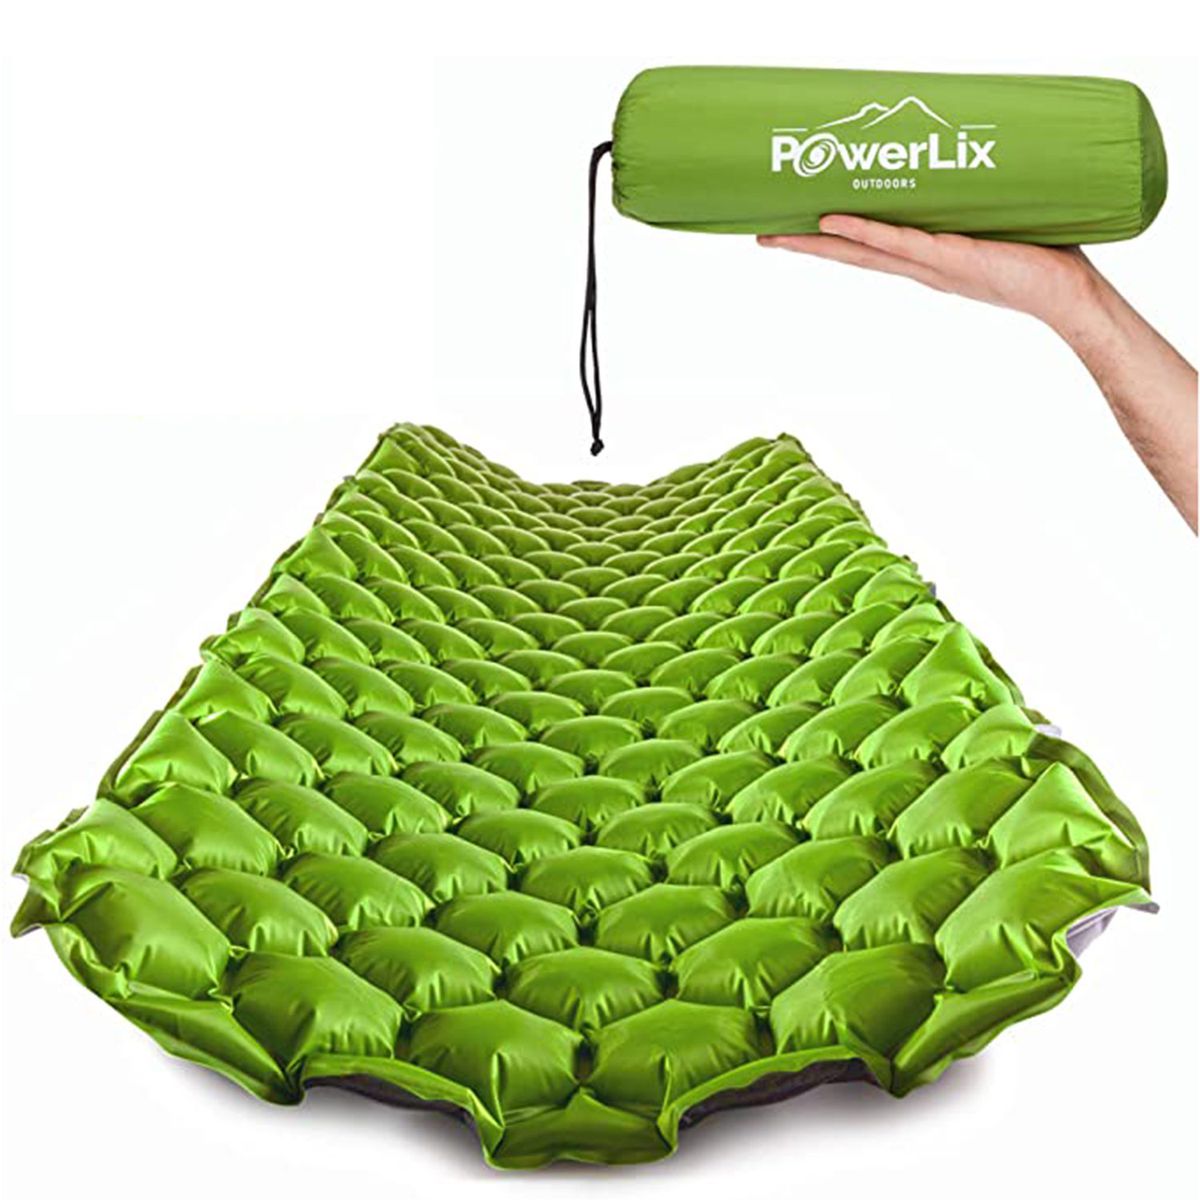 POWERLIX Sleeping Pad Ultralight Inflatable Sleeping Mat, Ultimate for Camping